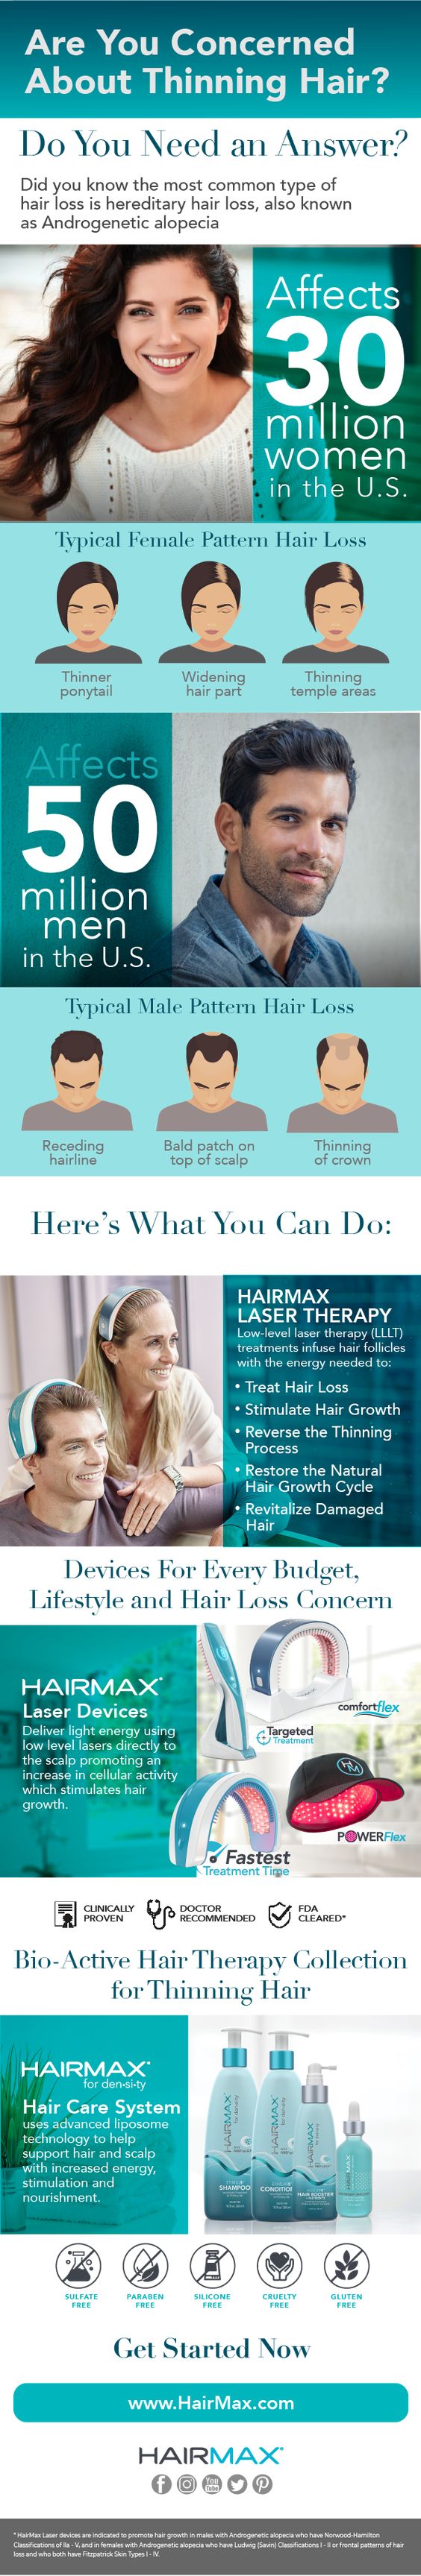 Concerned About Hair Loss?